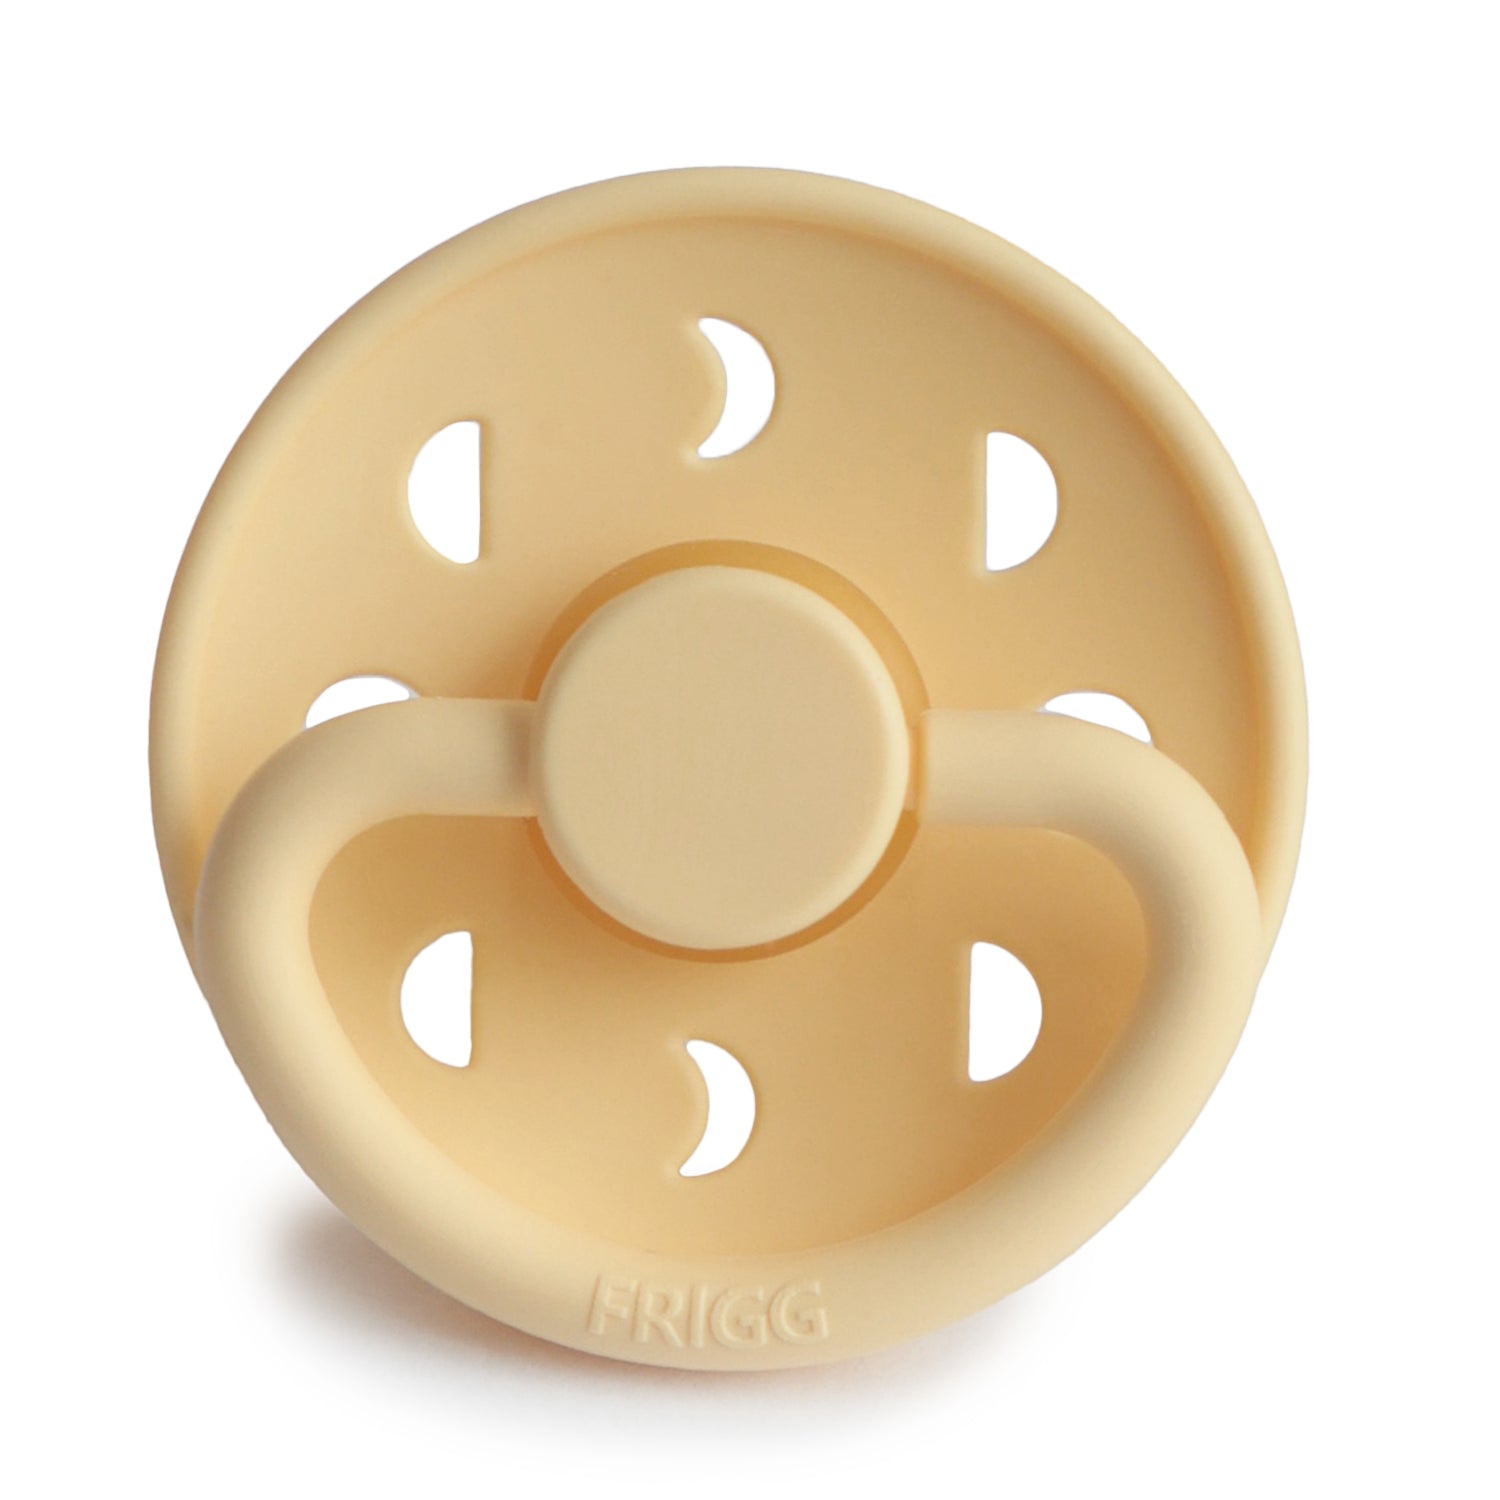 FRIGG Moon Phase Latex Pacifier Dummy – Pale Daffodil